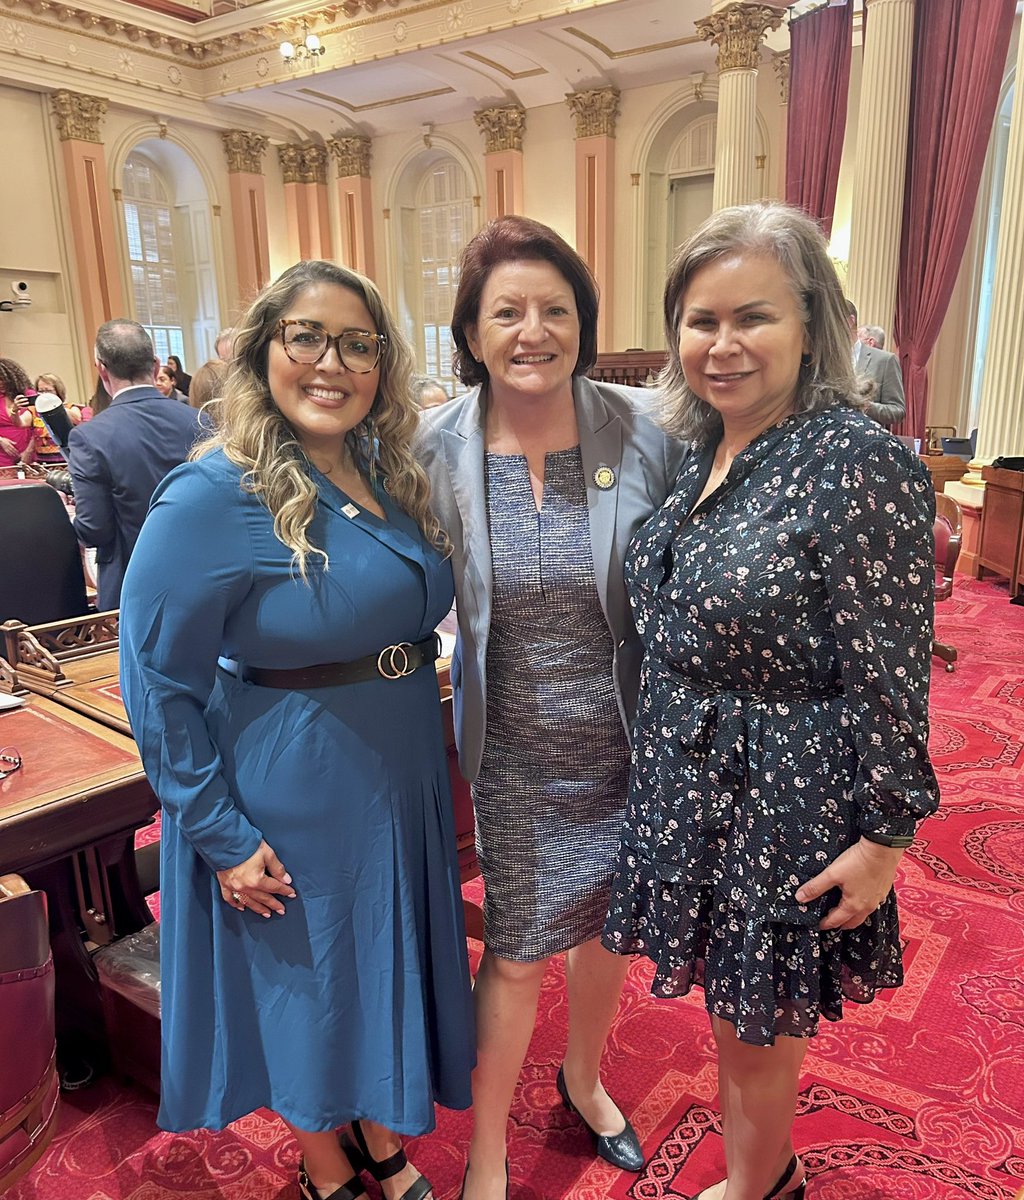 Congratulations to MANA de San Diego on being recognized as one of the @LatinoCaucus honorees today! MANA de San Diego does incredible work uplifting and empowering Latinas.